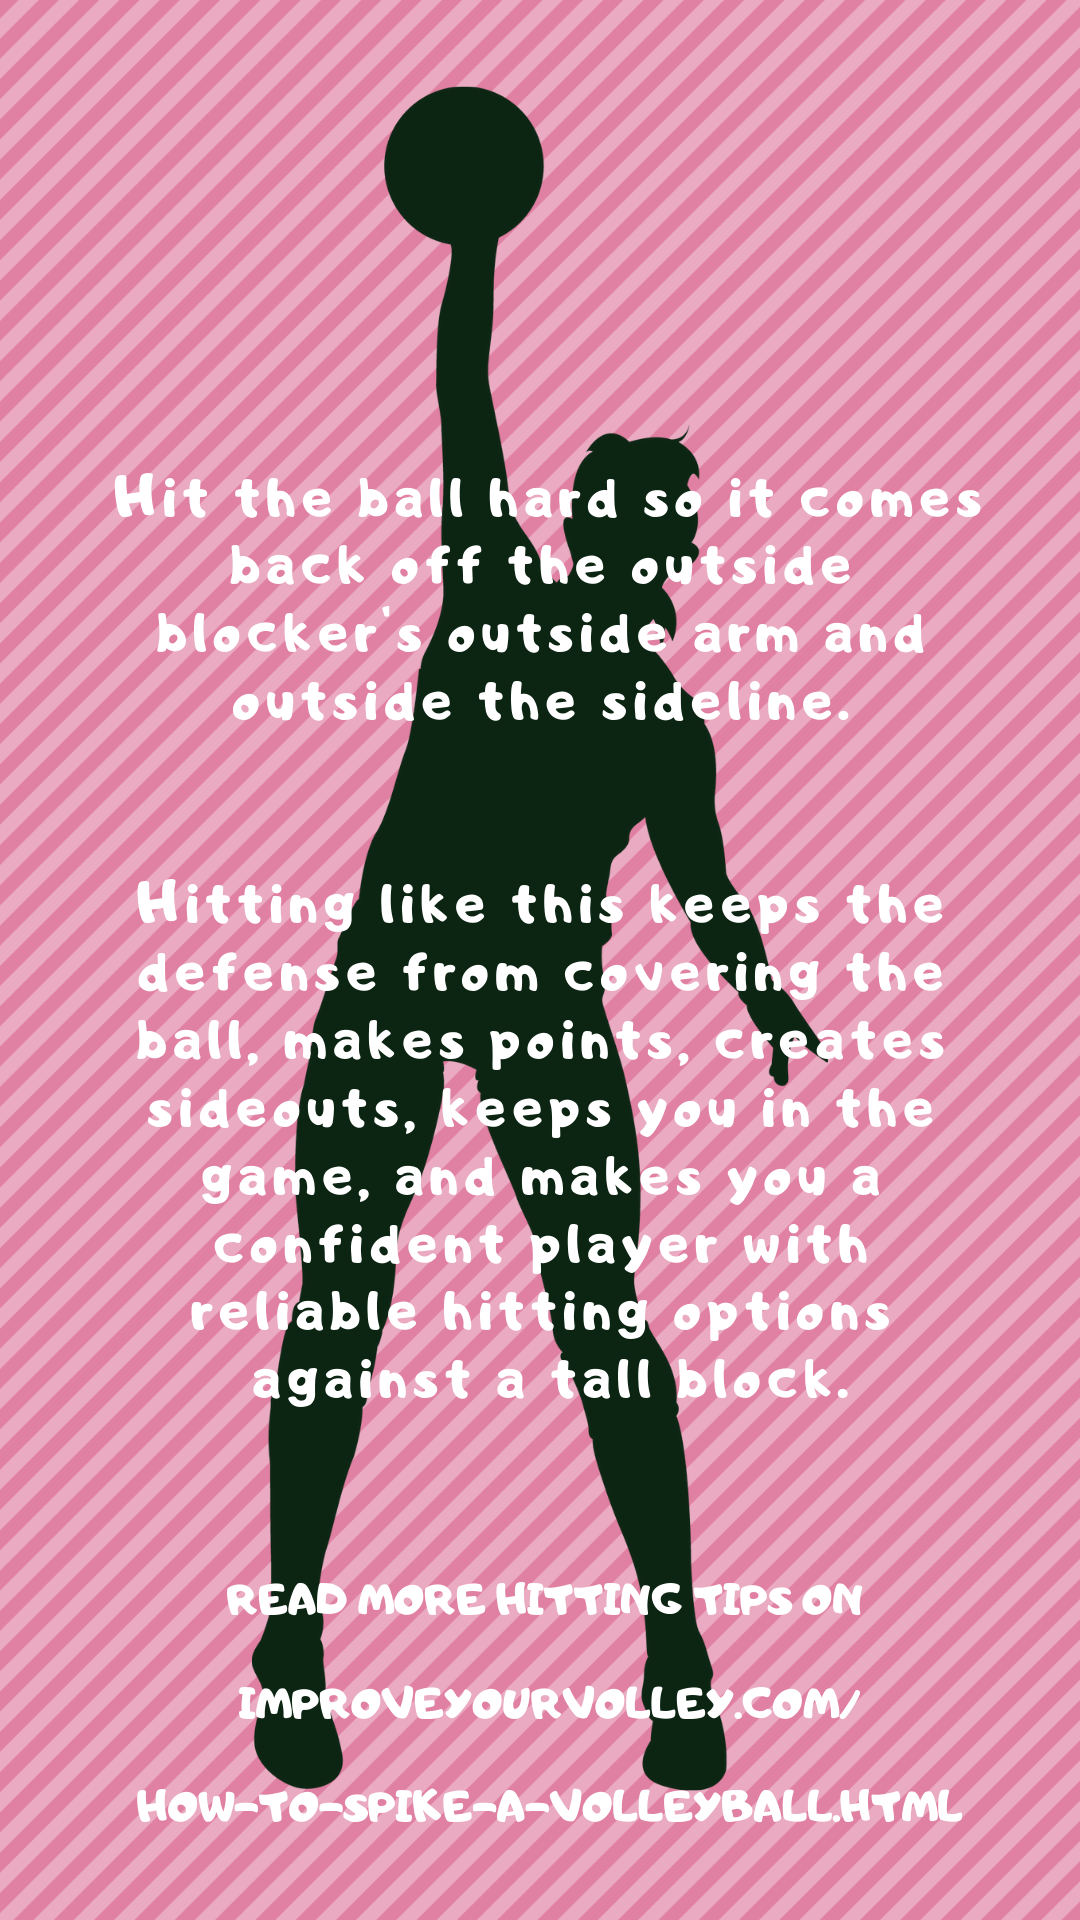 Hit the ball hard so it comes back off her arm and outside the sideline. Hitting like this keeps the defense from covering the ball, makes points, creates sideouts, keeps you in the game,